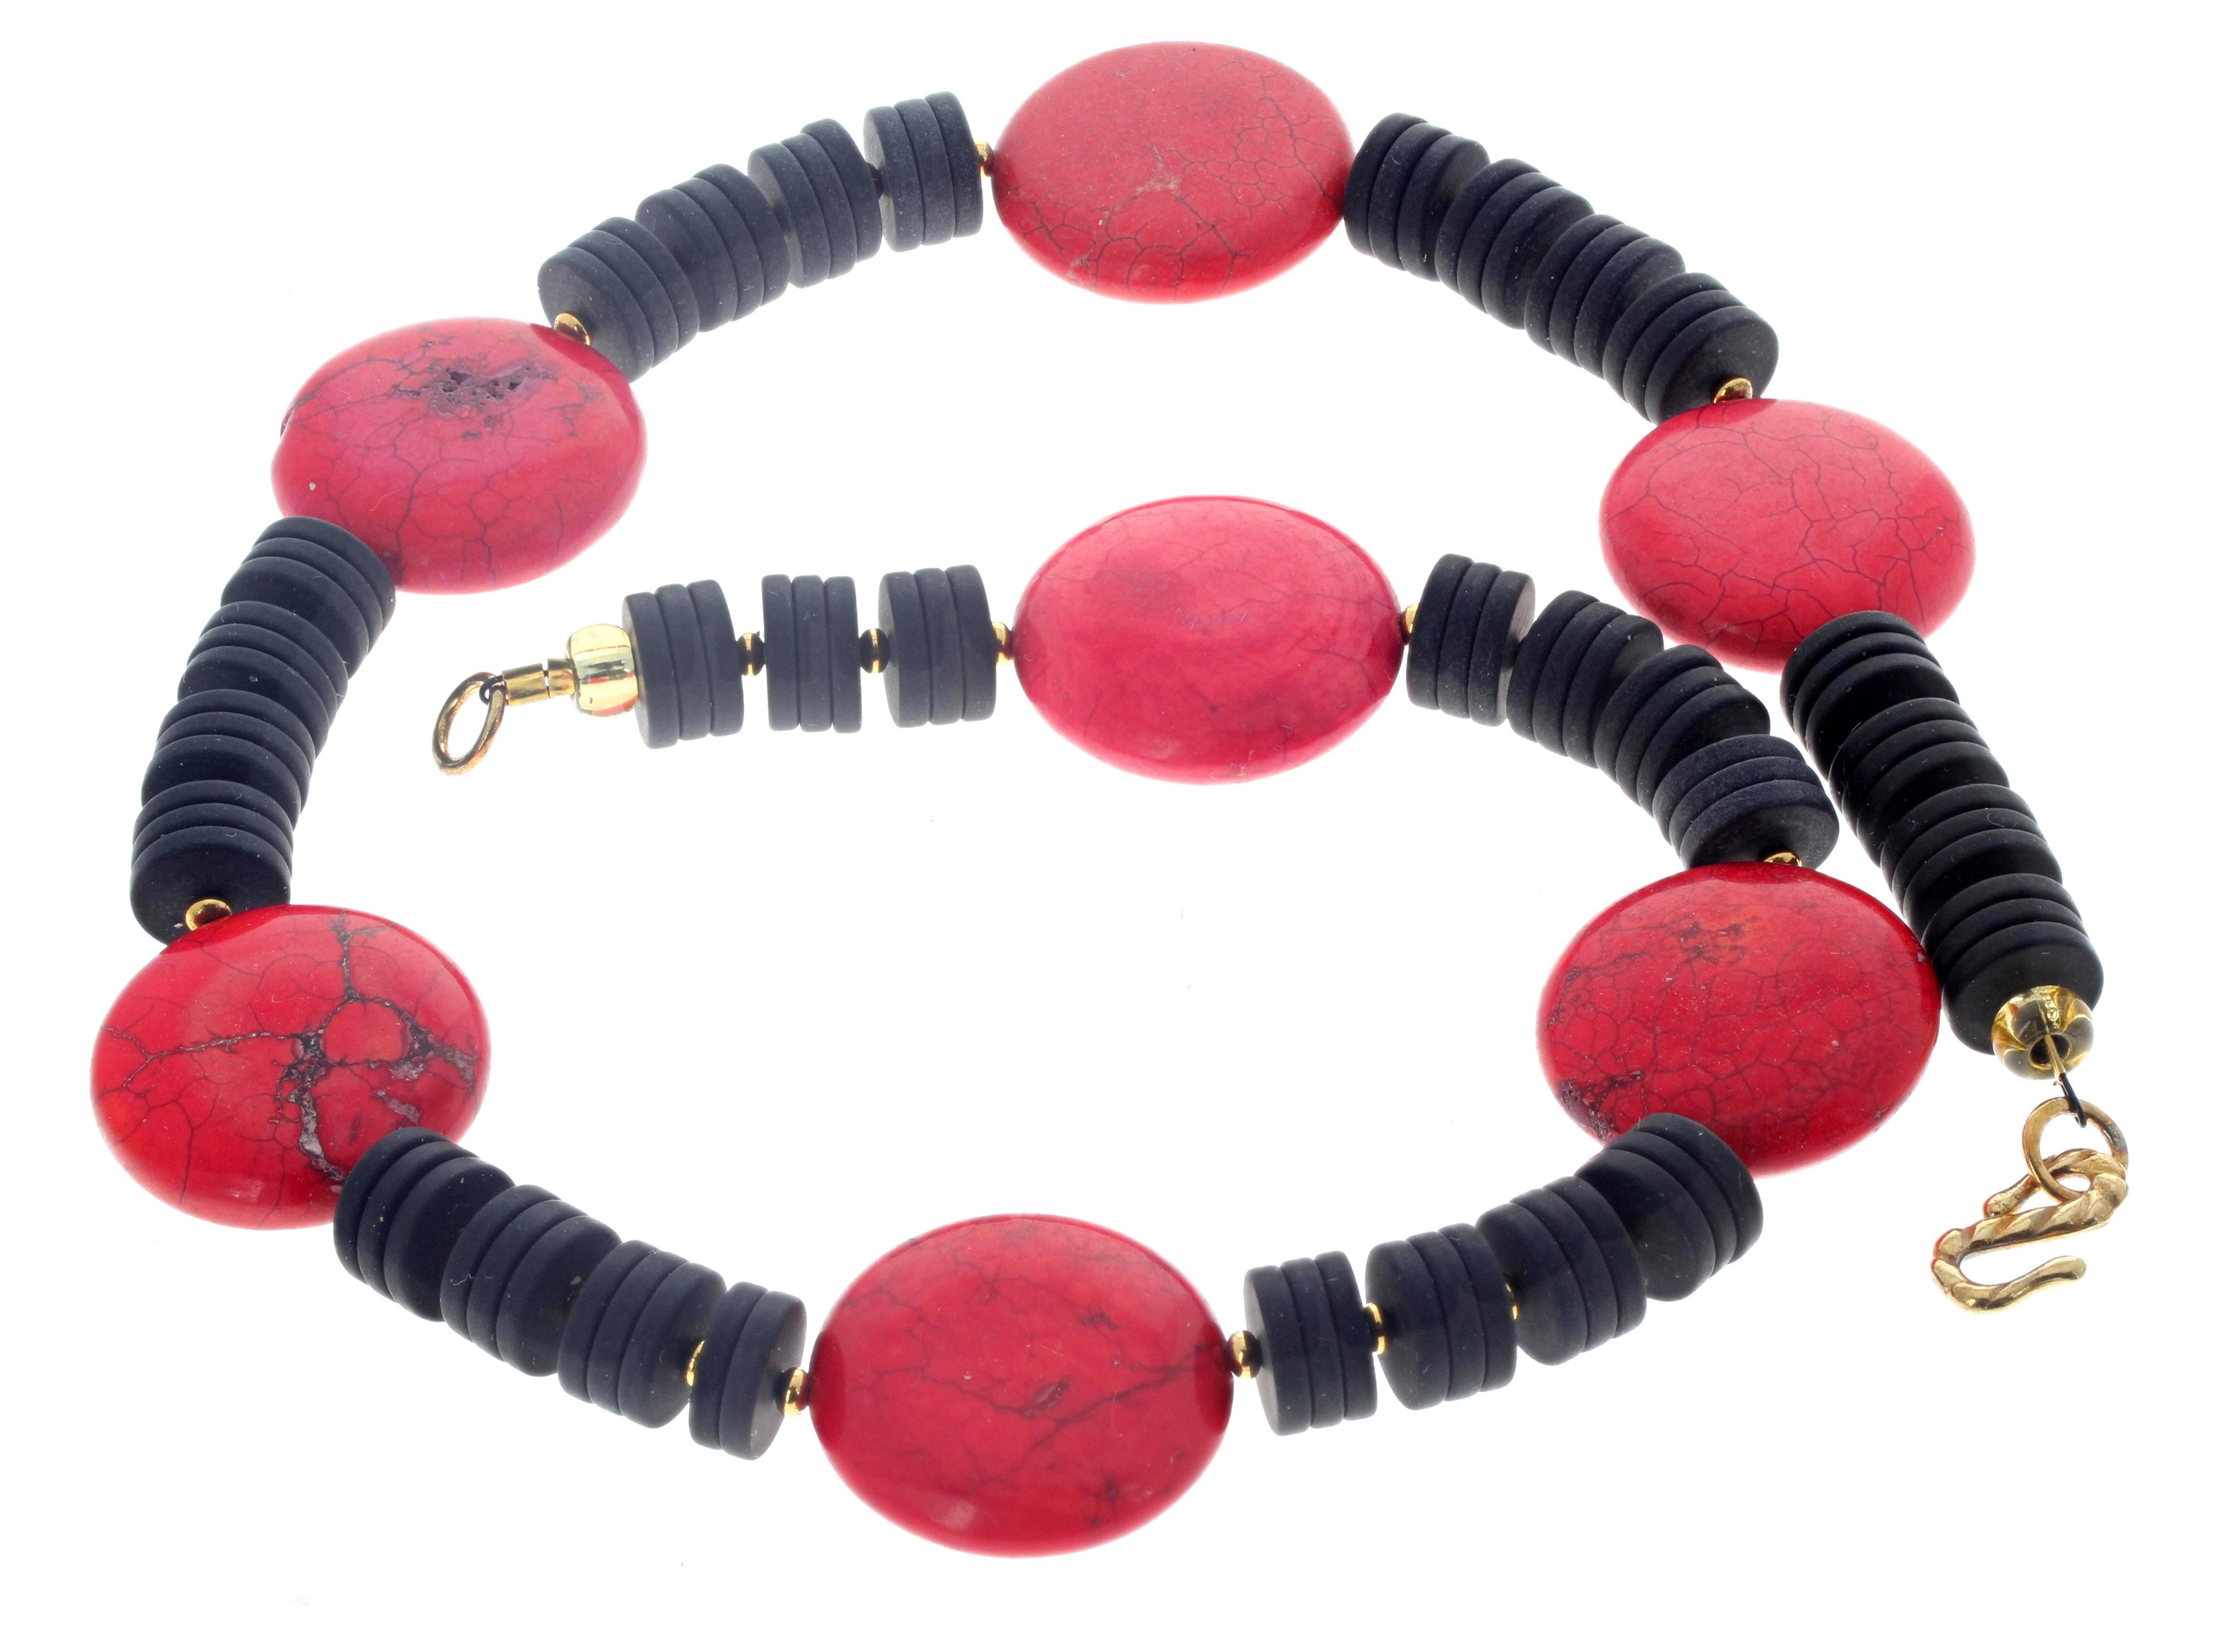 This beautiful natural Black Onyx and red Magnesite  necklace is 18 1/2 inches long.  The largest round red Magnesites are approximately 25mm and the the black Onyx are approximately 10mm.  The gold plated clasp is an easy to use hook clasp.  